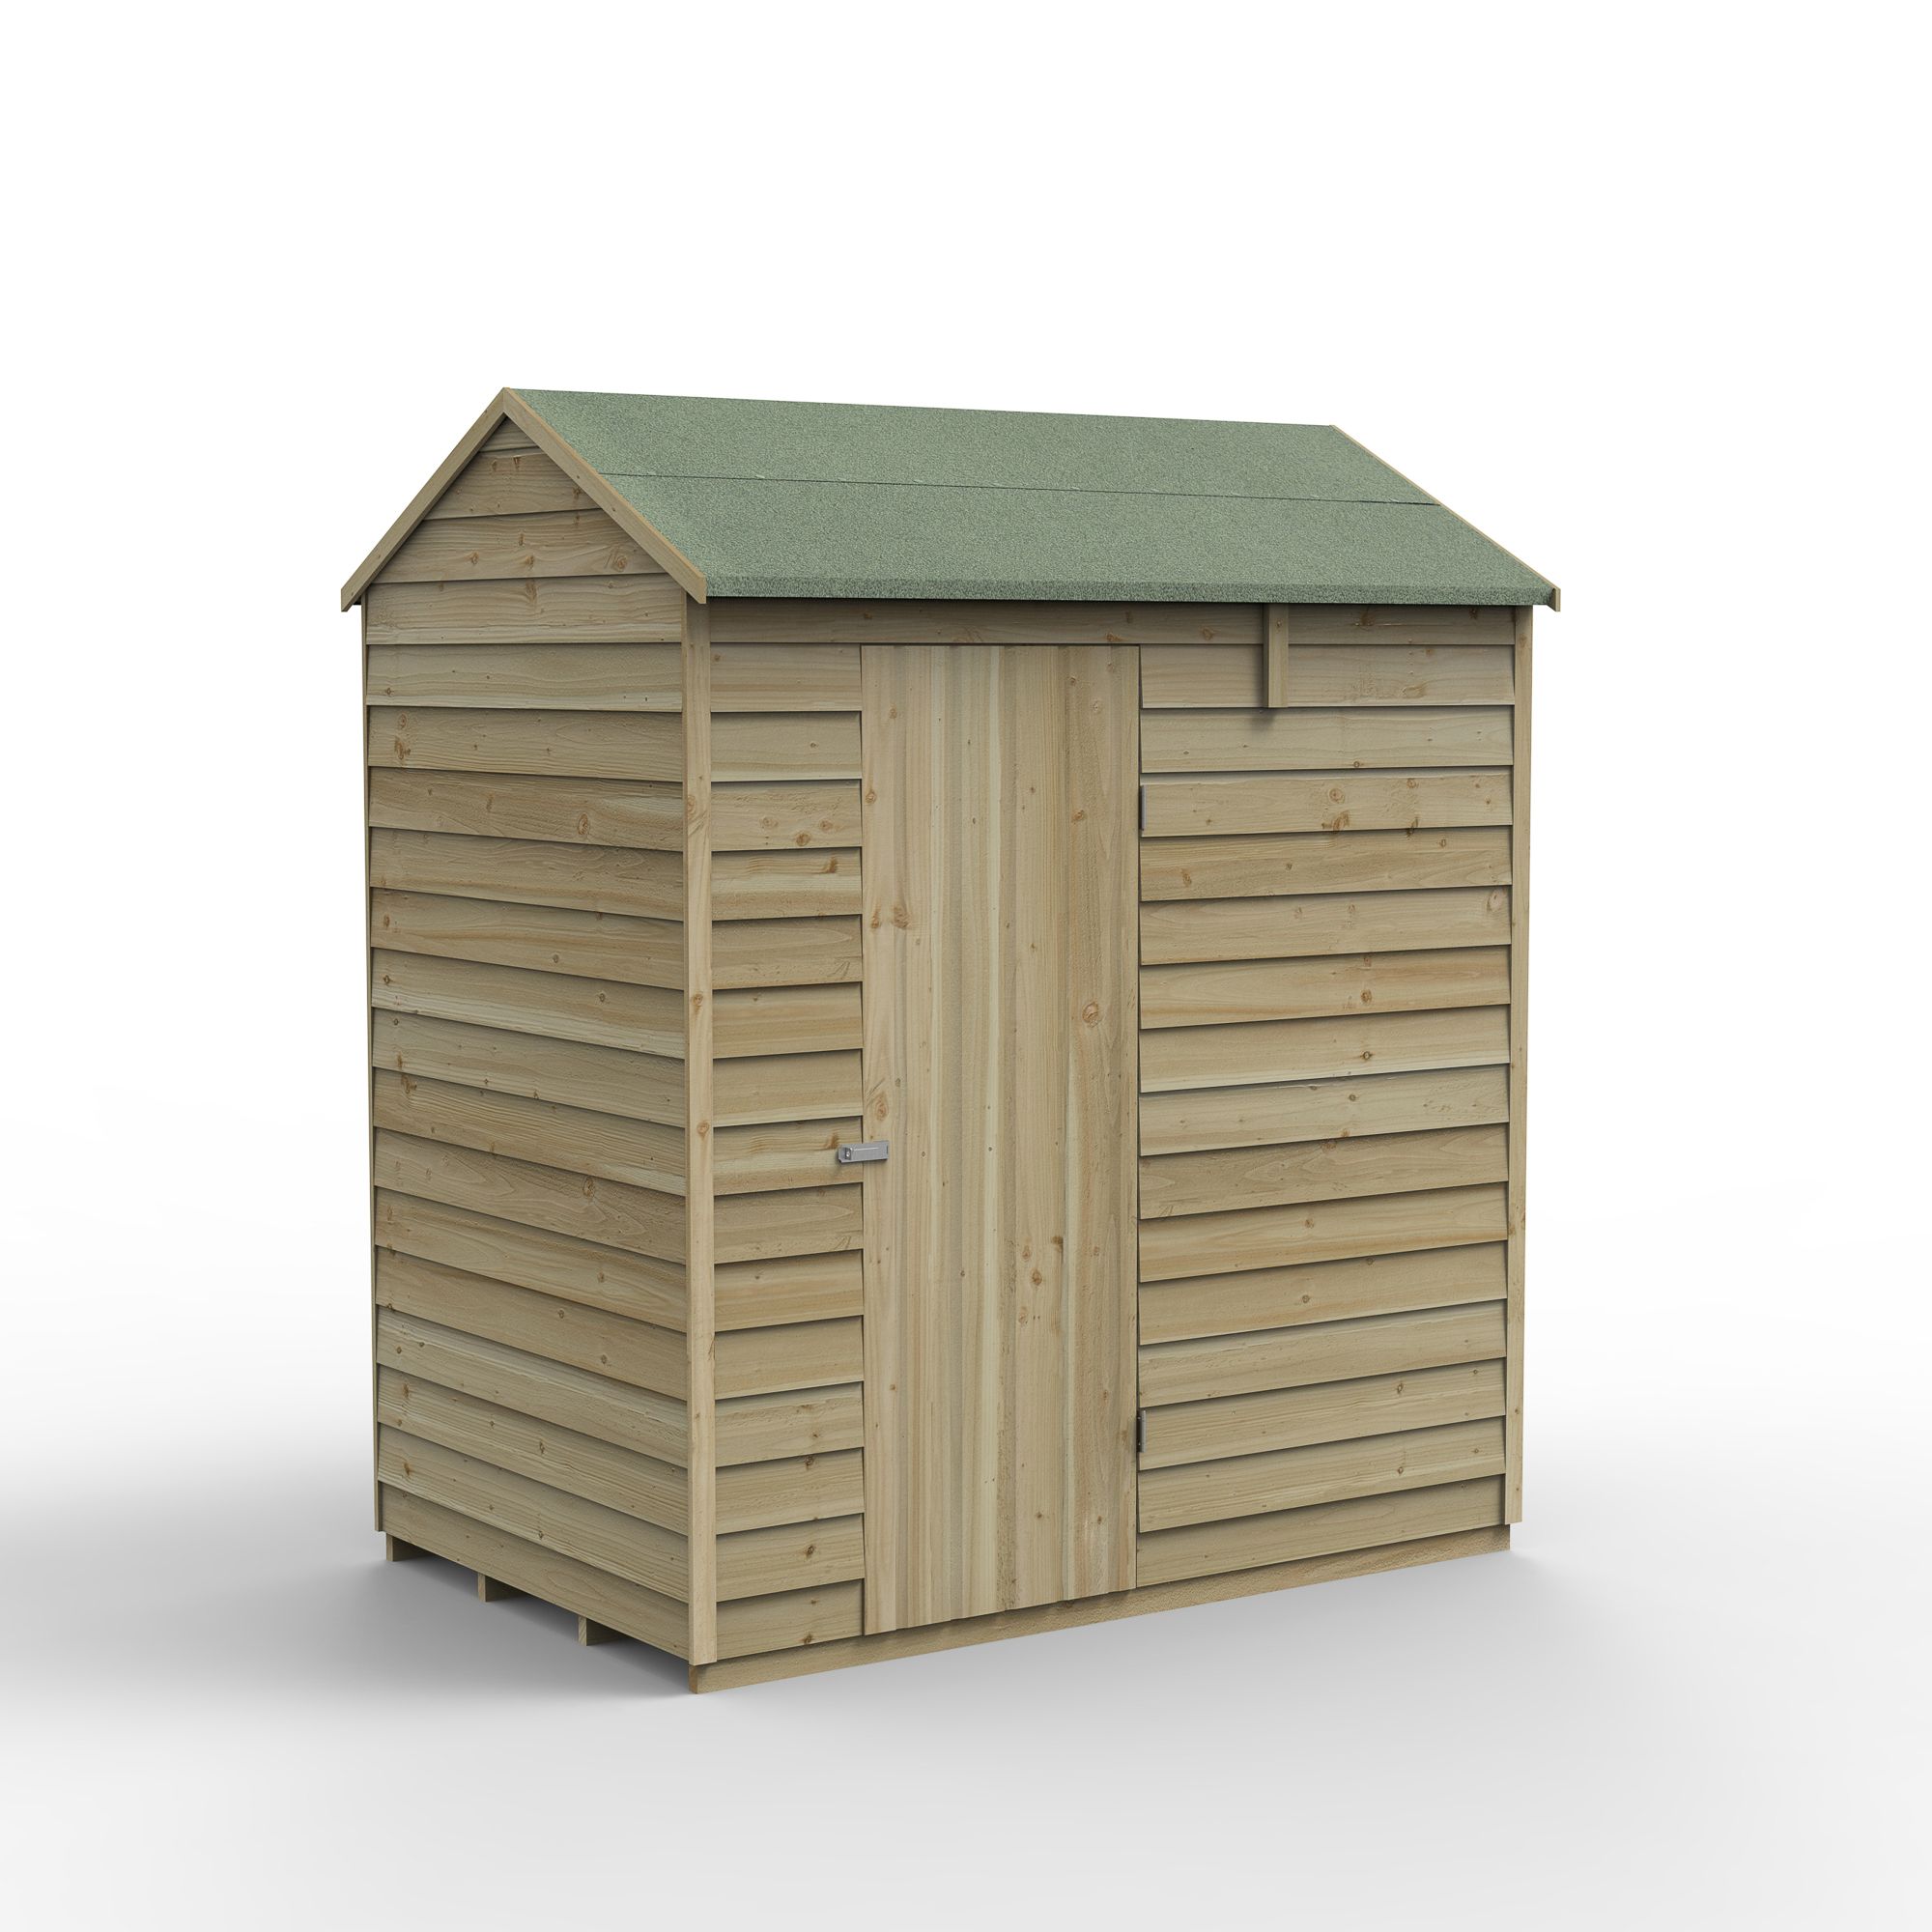 Forest Garden Overlap 6x4 ft Reverse apex Wooden Shed with floor (Base included) - Assembly service included